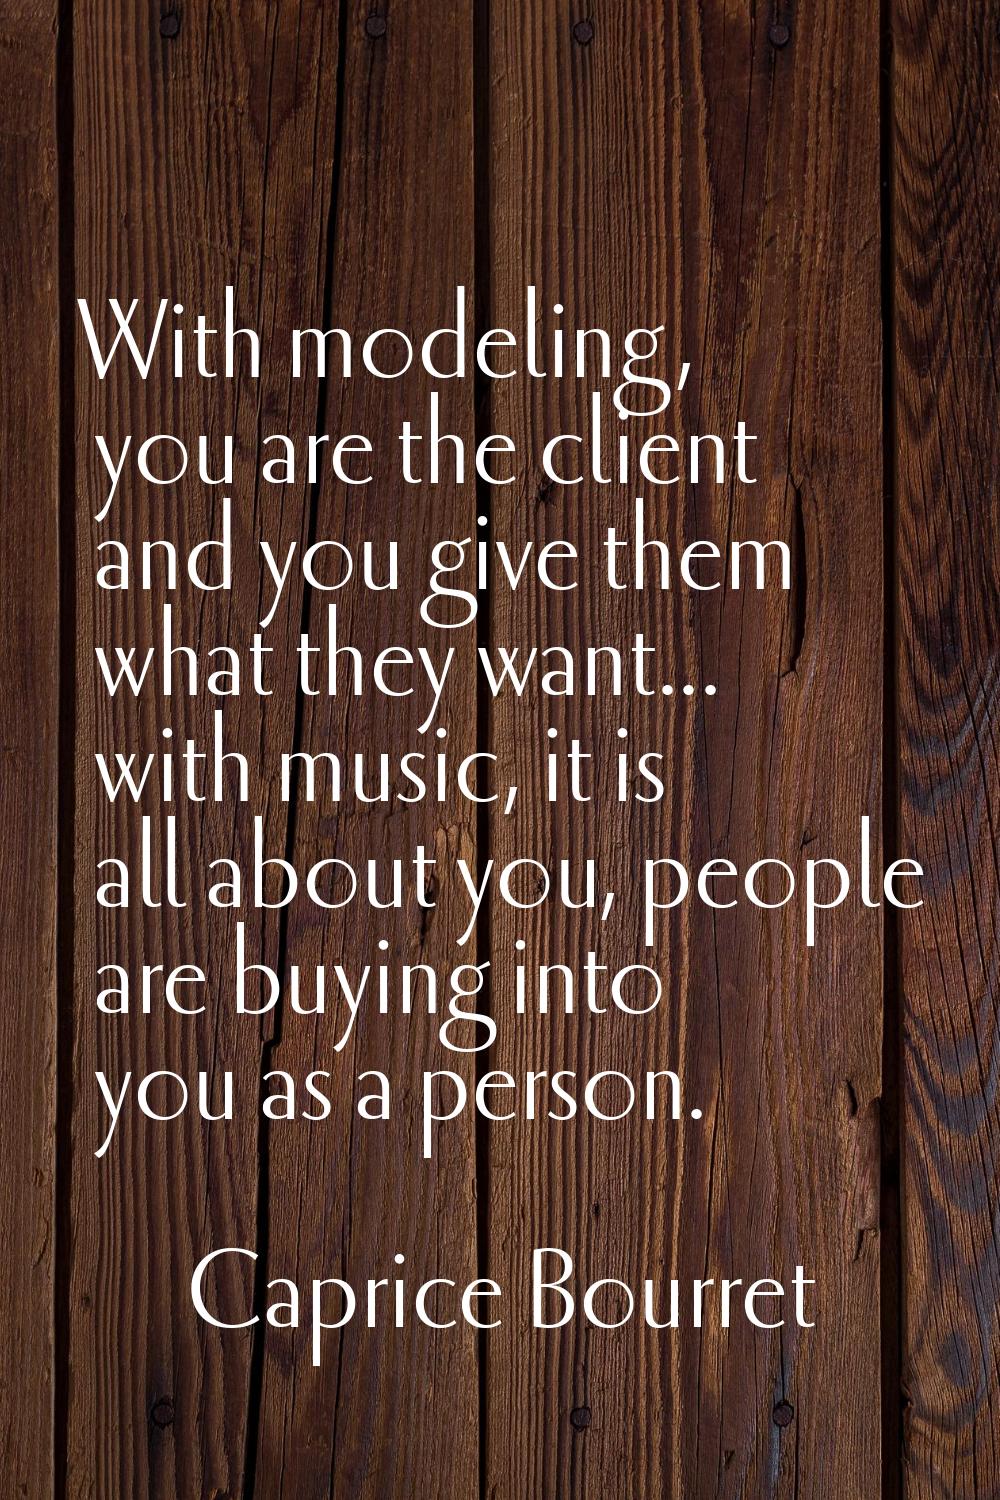 With modeling, you are the client and you give them what they want... with music, it is all about y